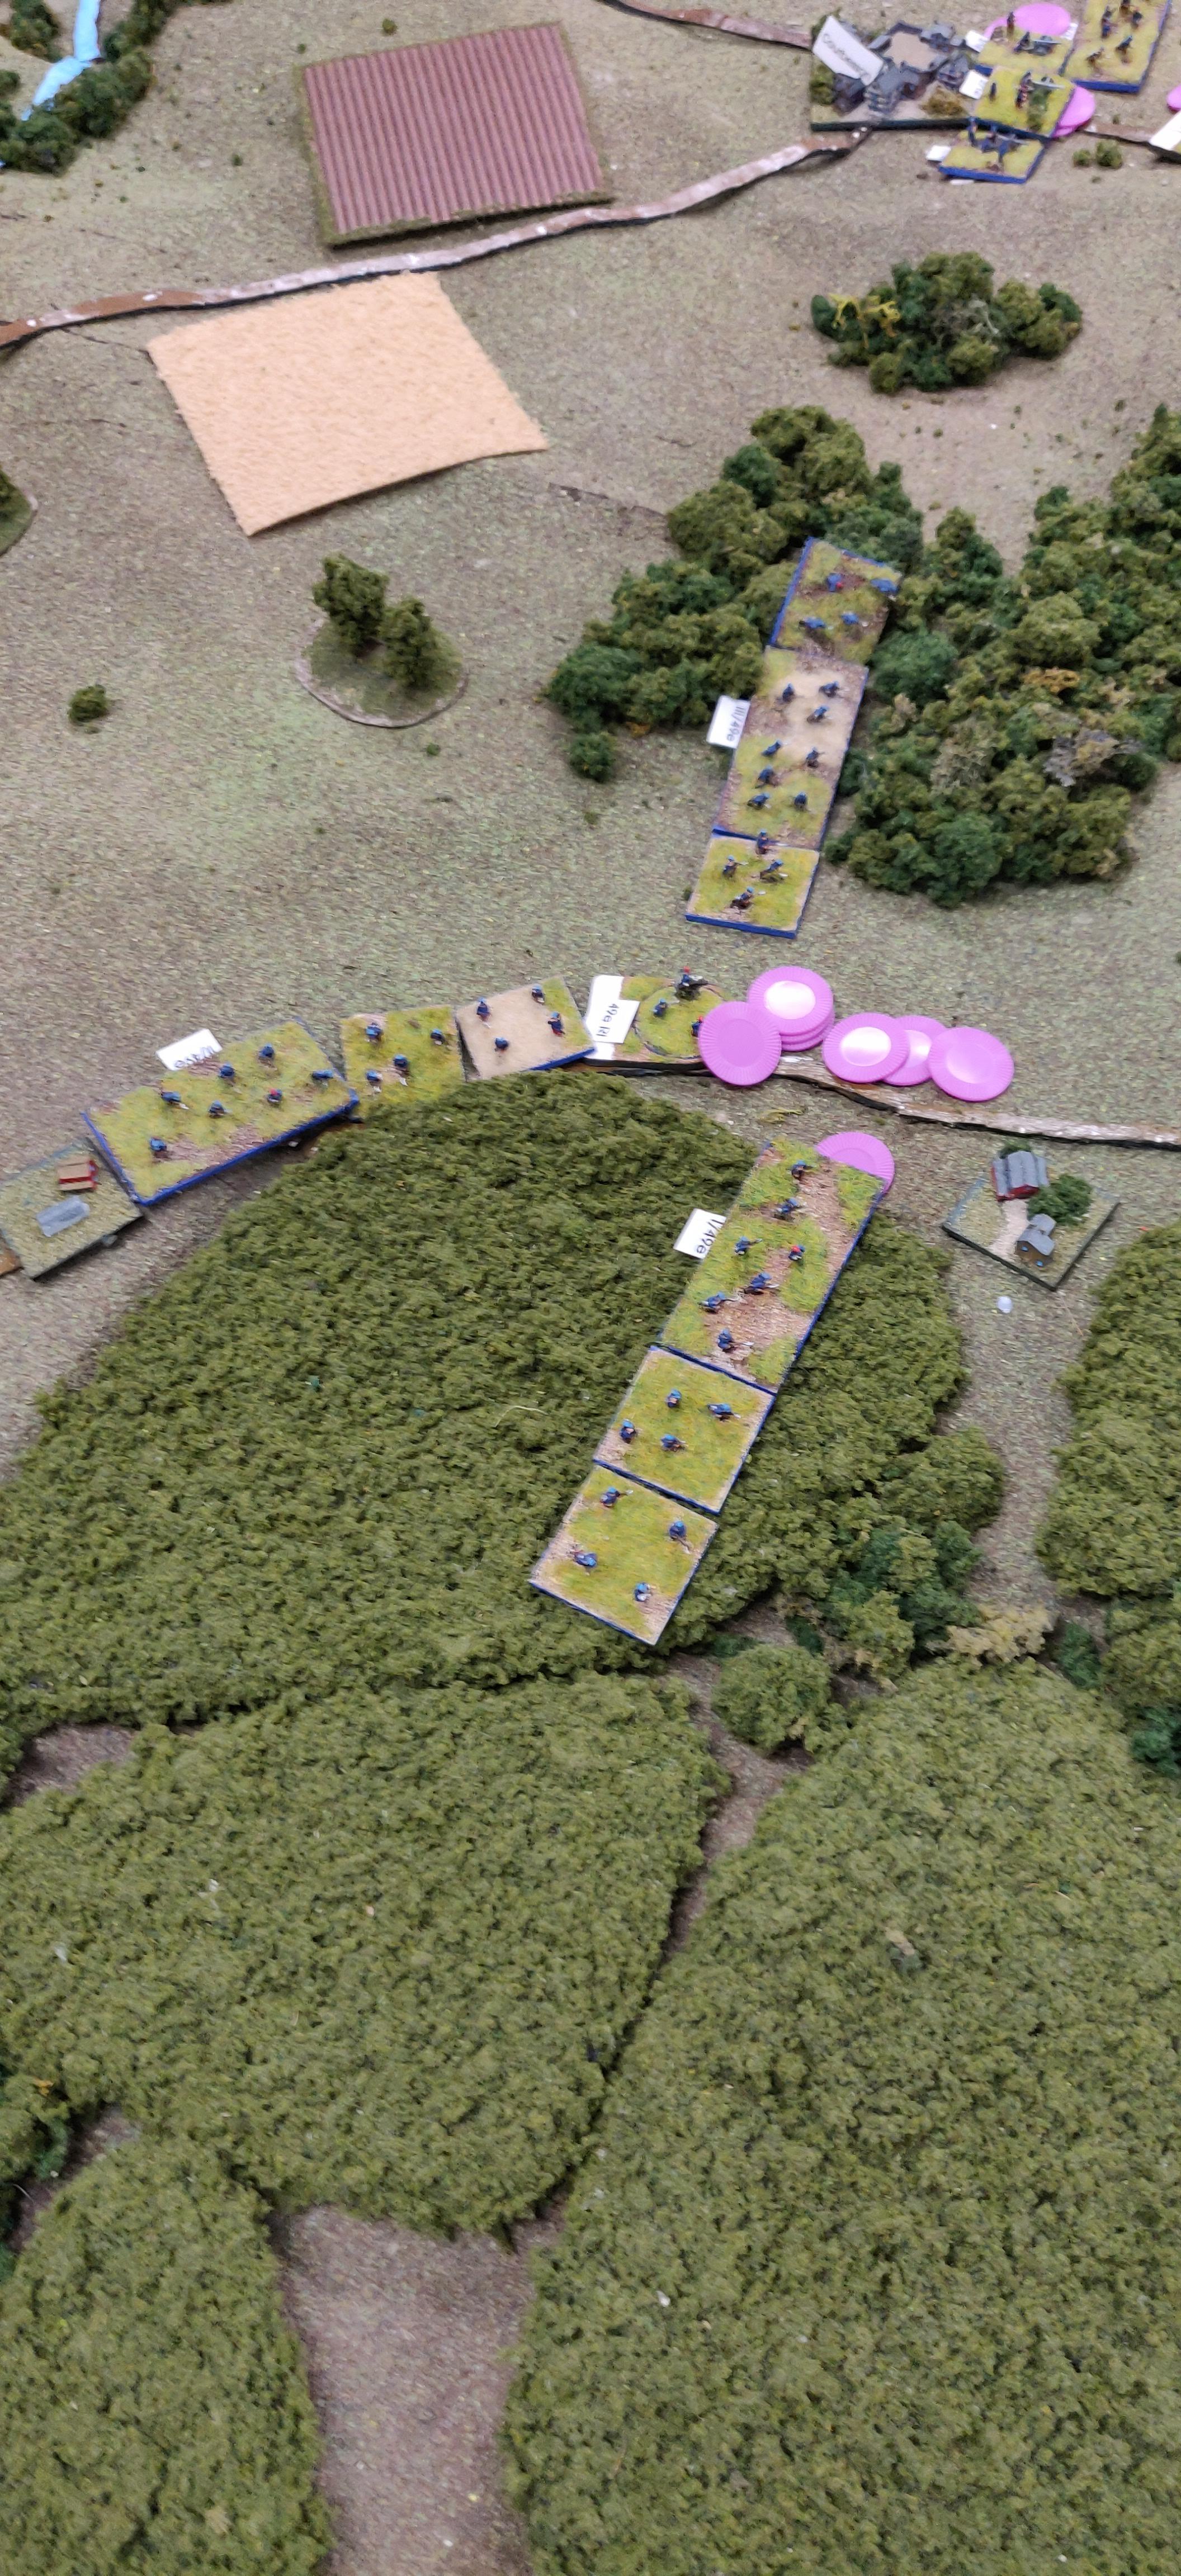 The 49e Regiment deploys along the Marchais road. The purple tokens represent orders, both to the regiment and the Battalion. Here, the large number represents a few bad dice rolls causing a breakdown in command and control.